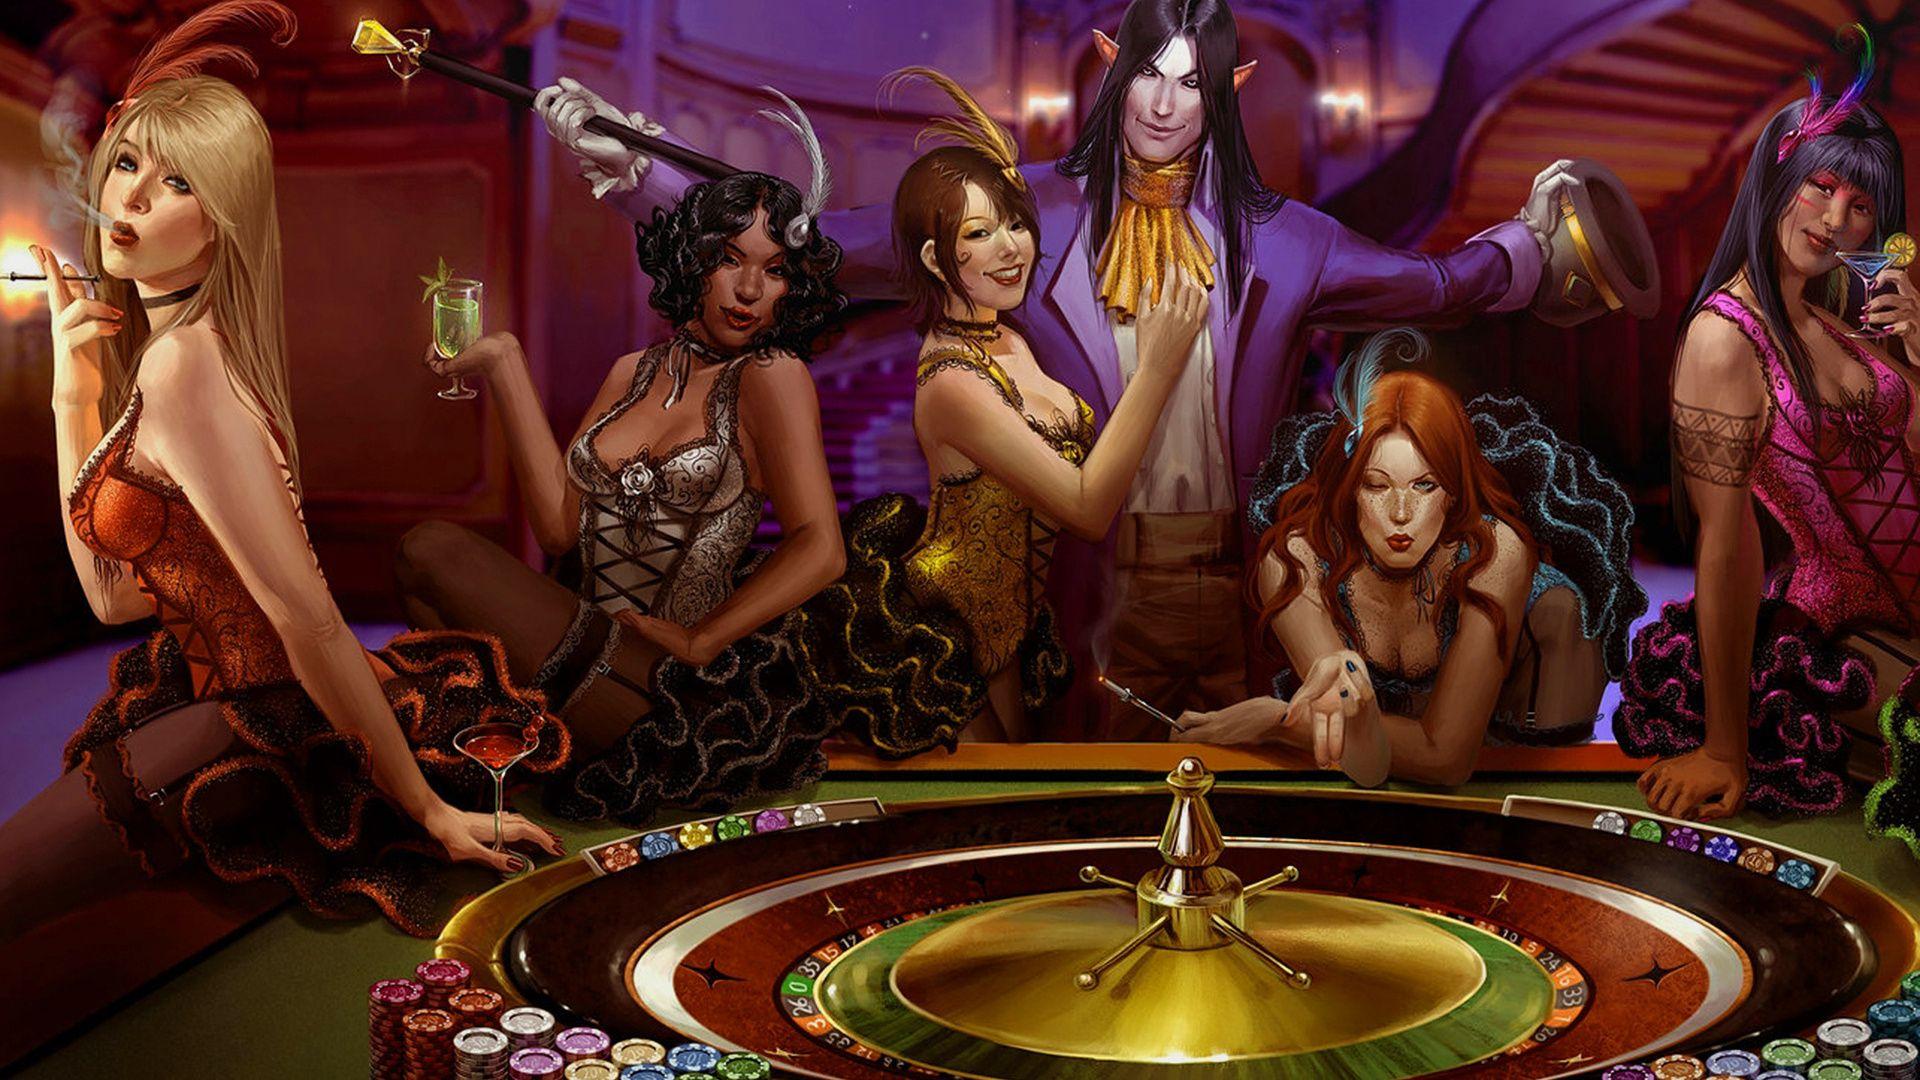 Casino, Chips, Roulette, Girls Wallpaper and Picture